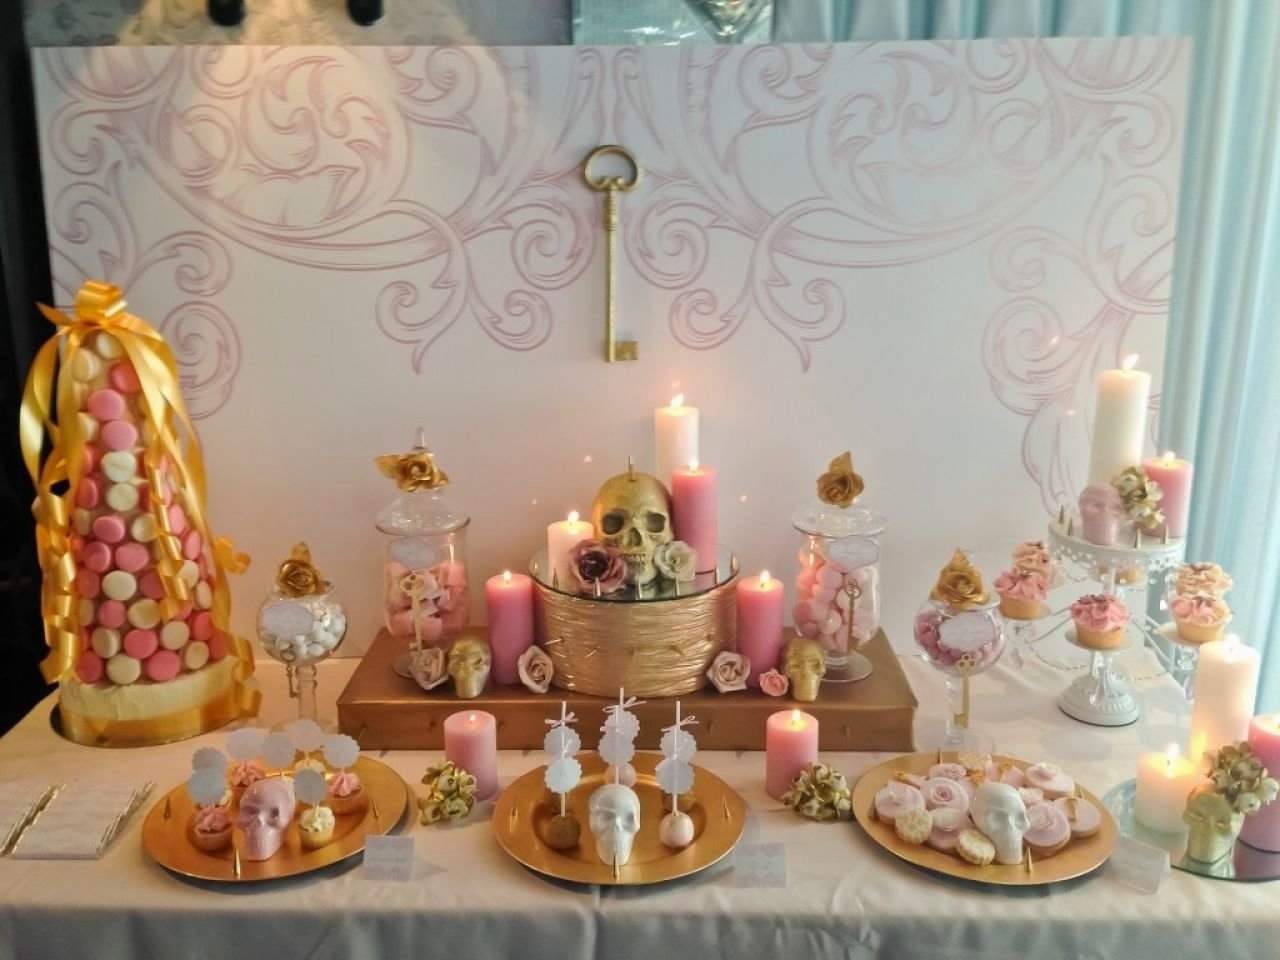 10 Wonderful 21 Birthday Party Ideas For Her  2019